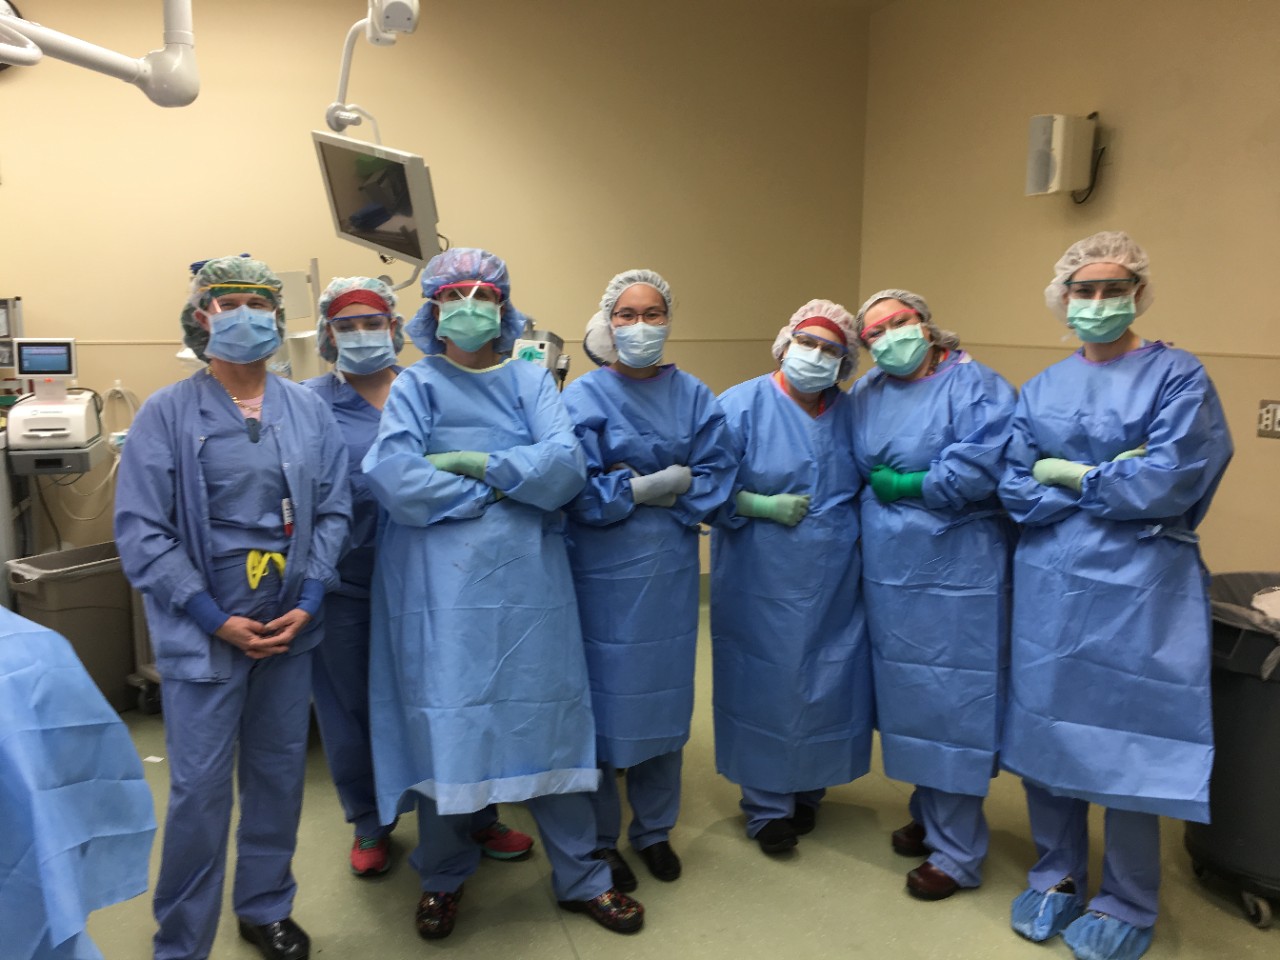 Dr. Jaime Lewis ( third from left) with her surgical team in the OR